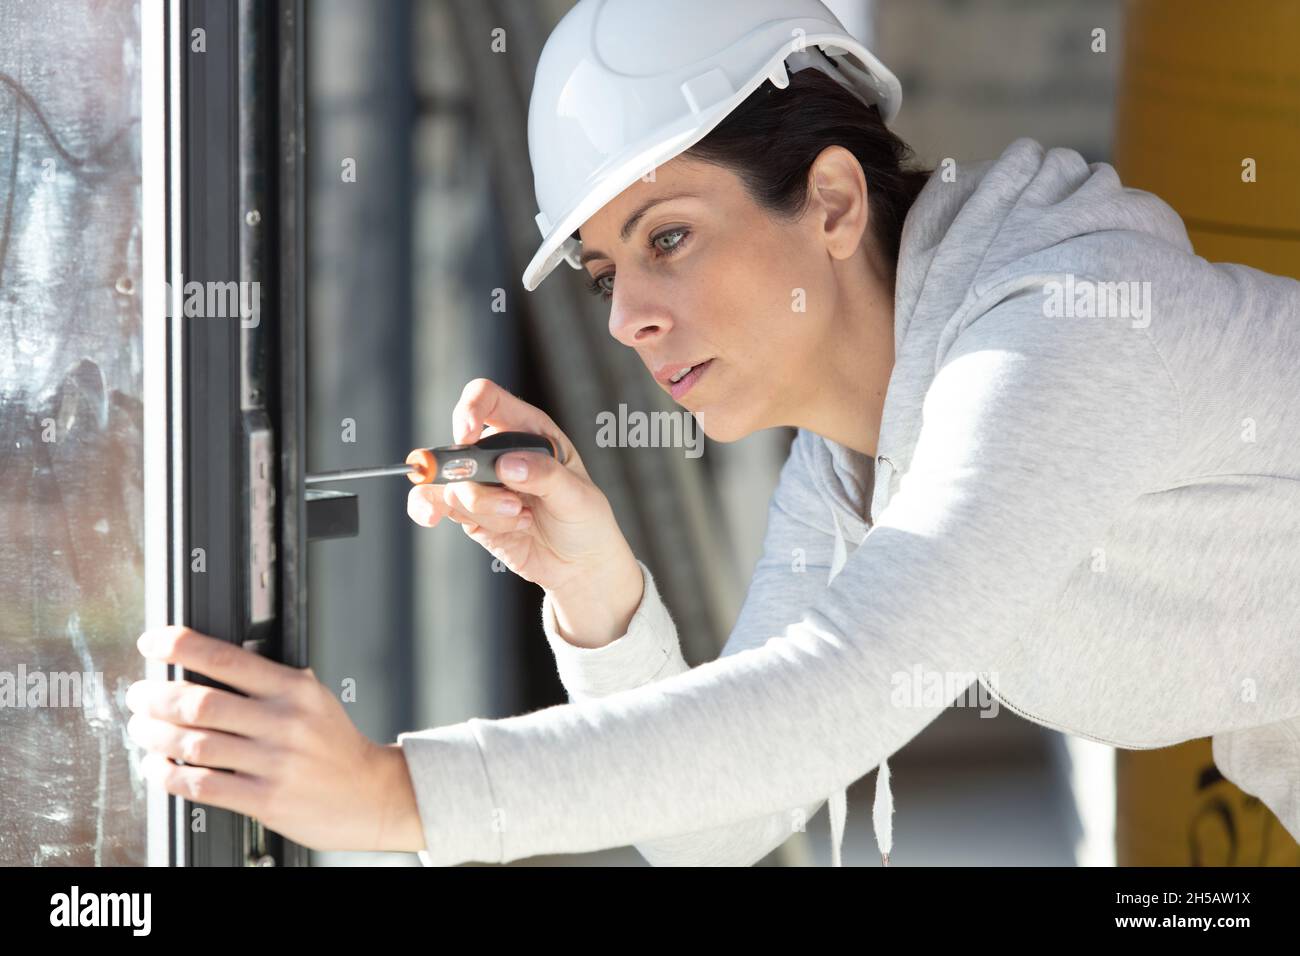 young woman unscrews a window handle using screwdriver Stock Photo